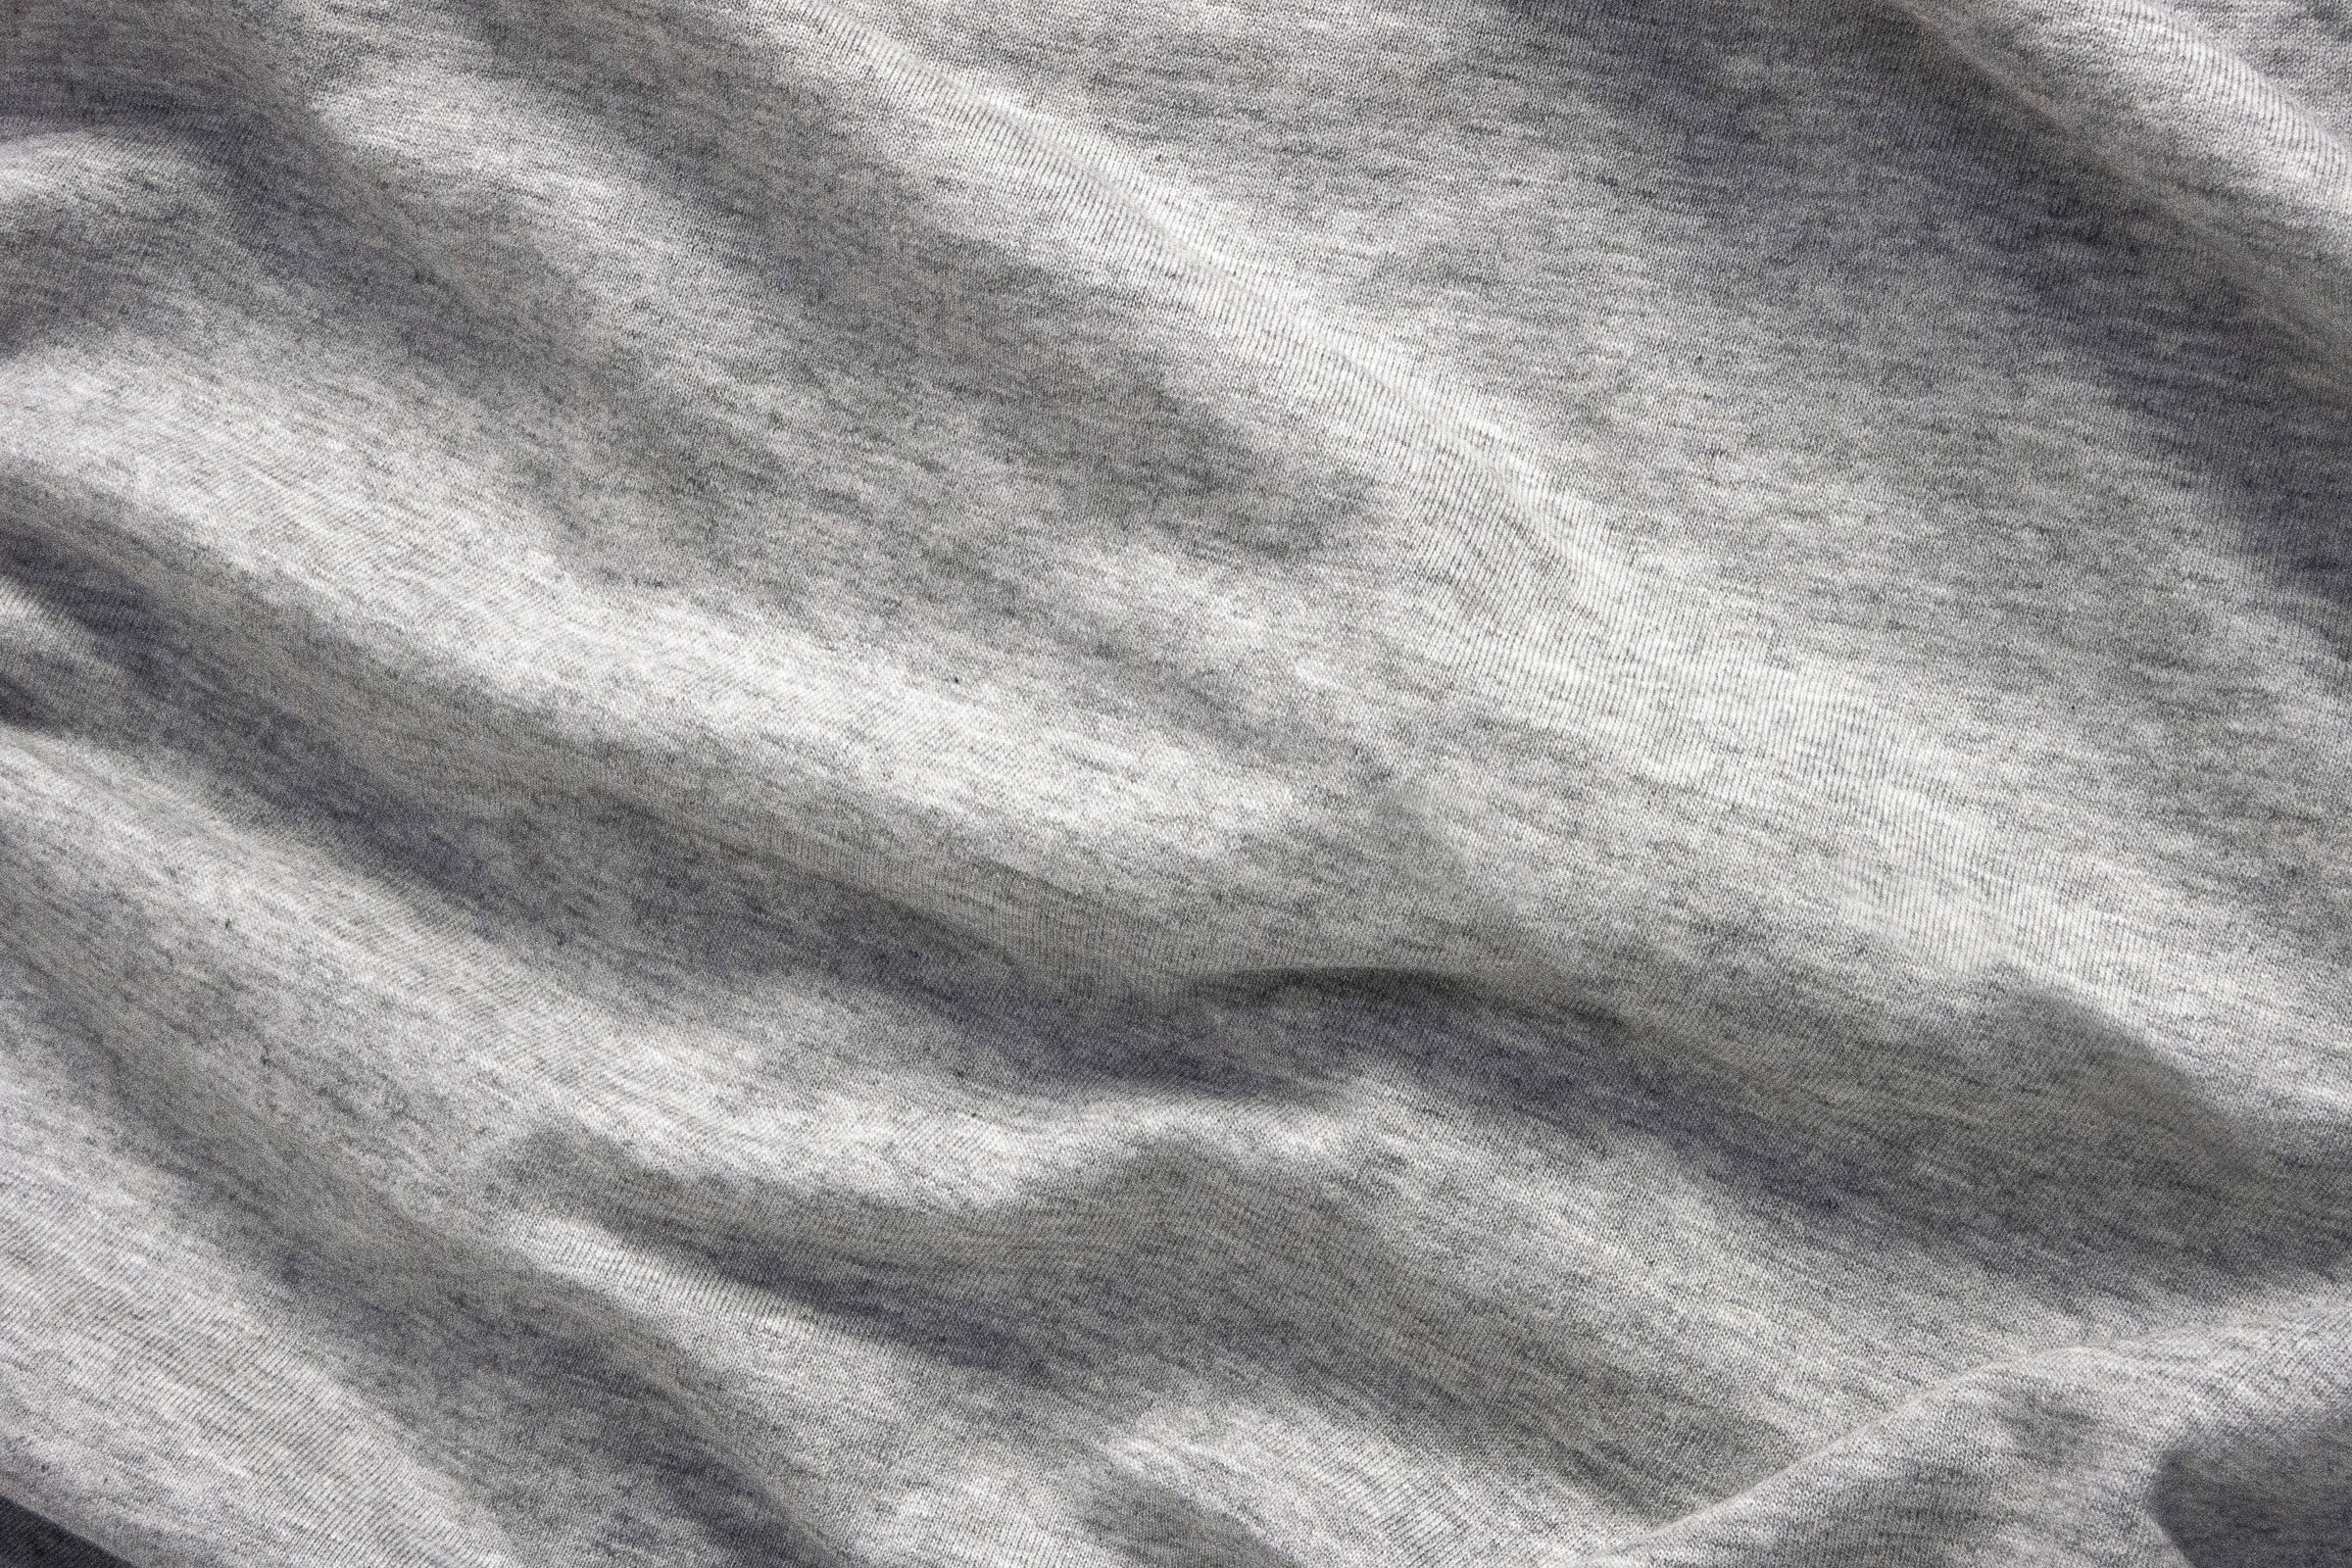 jersey-pebble-fitted-sheet-close-up-shot-by-sojao.jpg